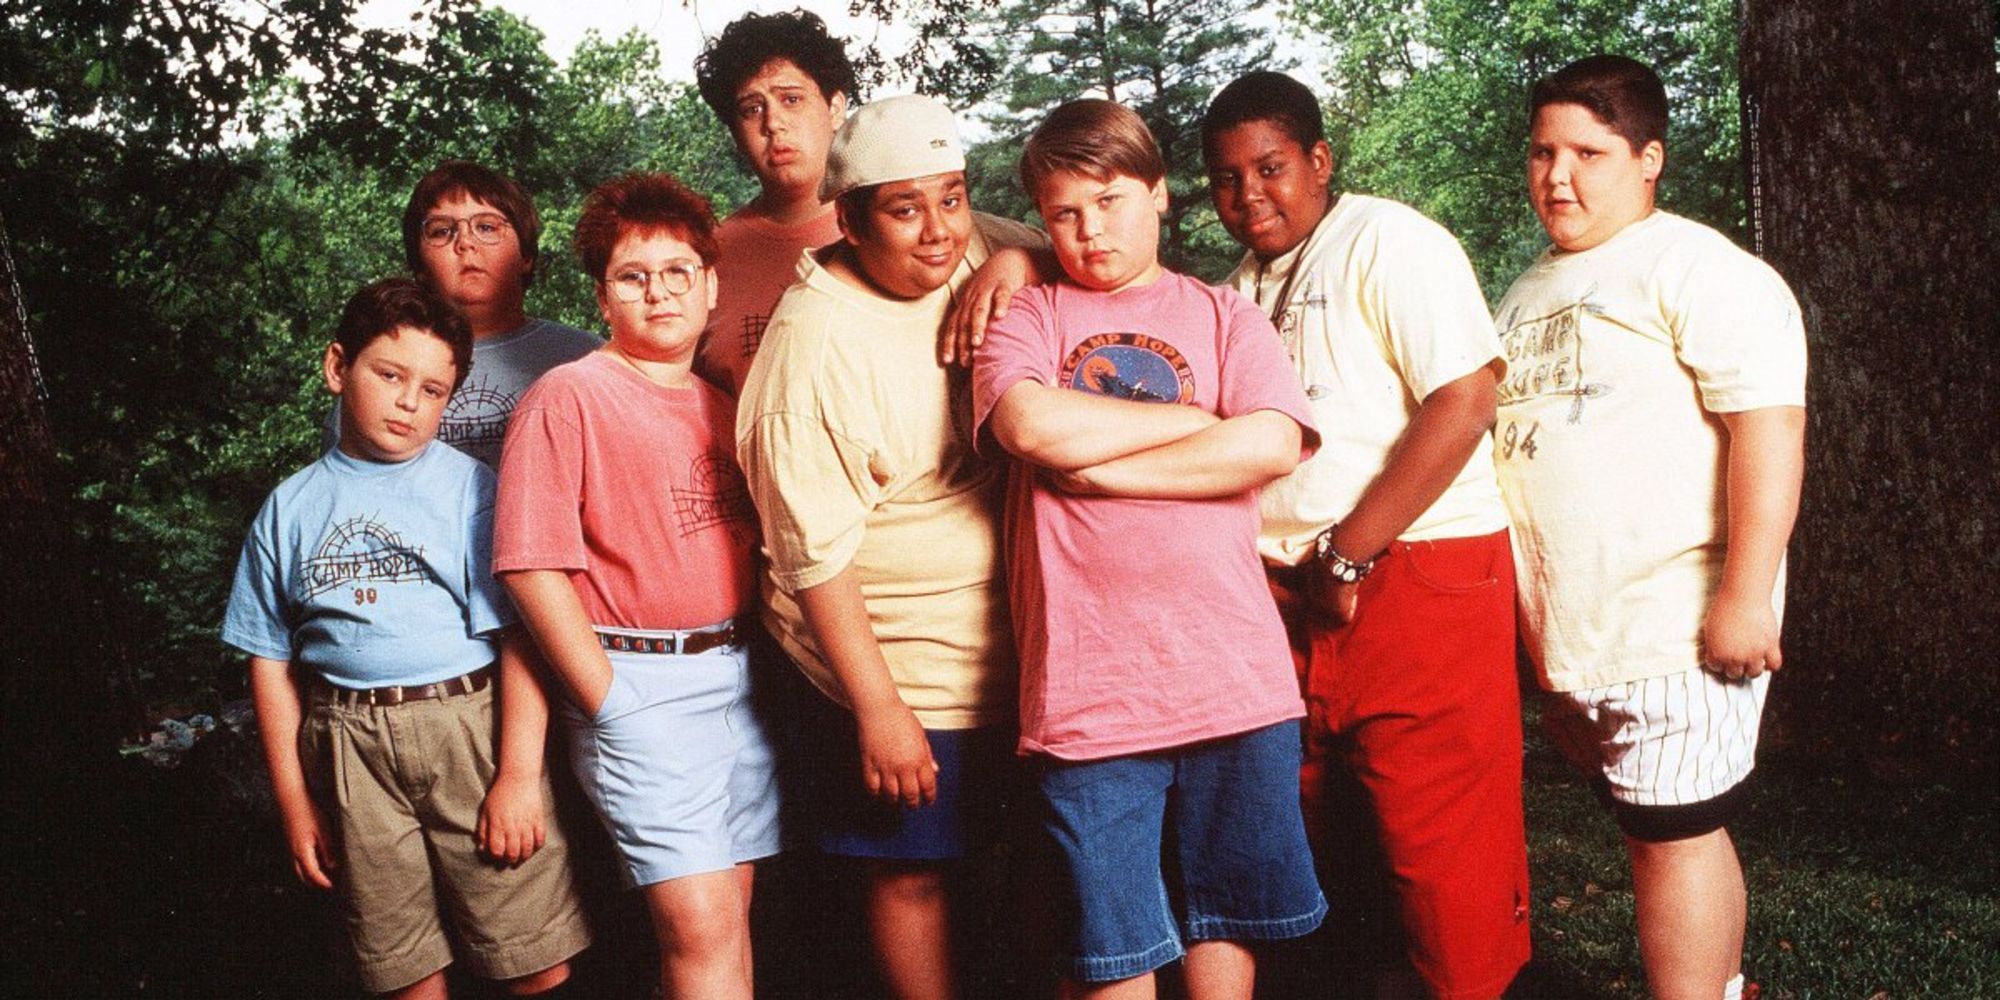 The cast of Heavyweights posing for a photo.